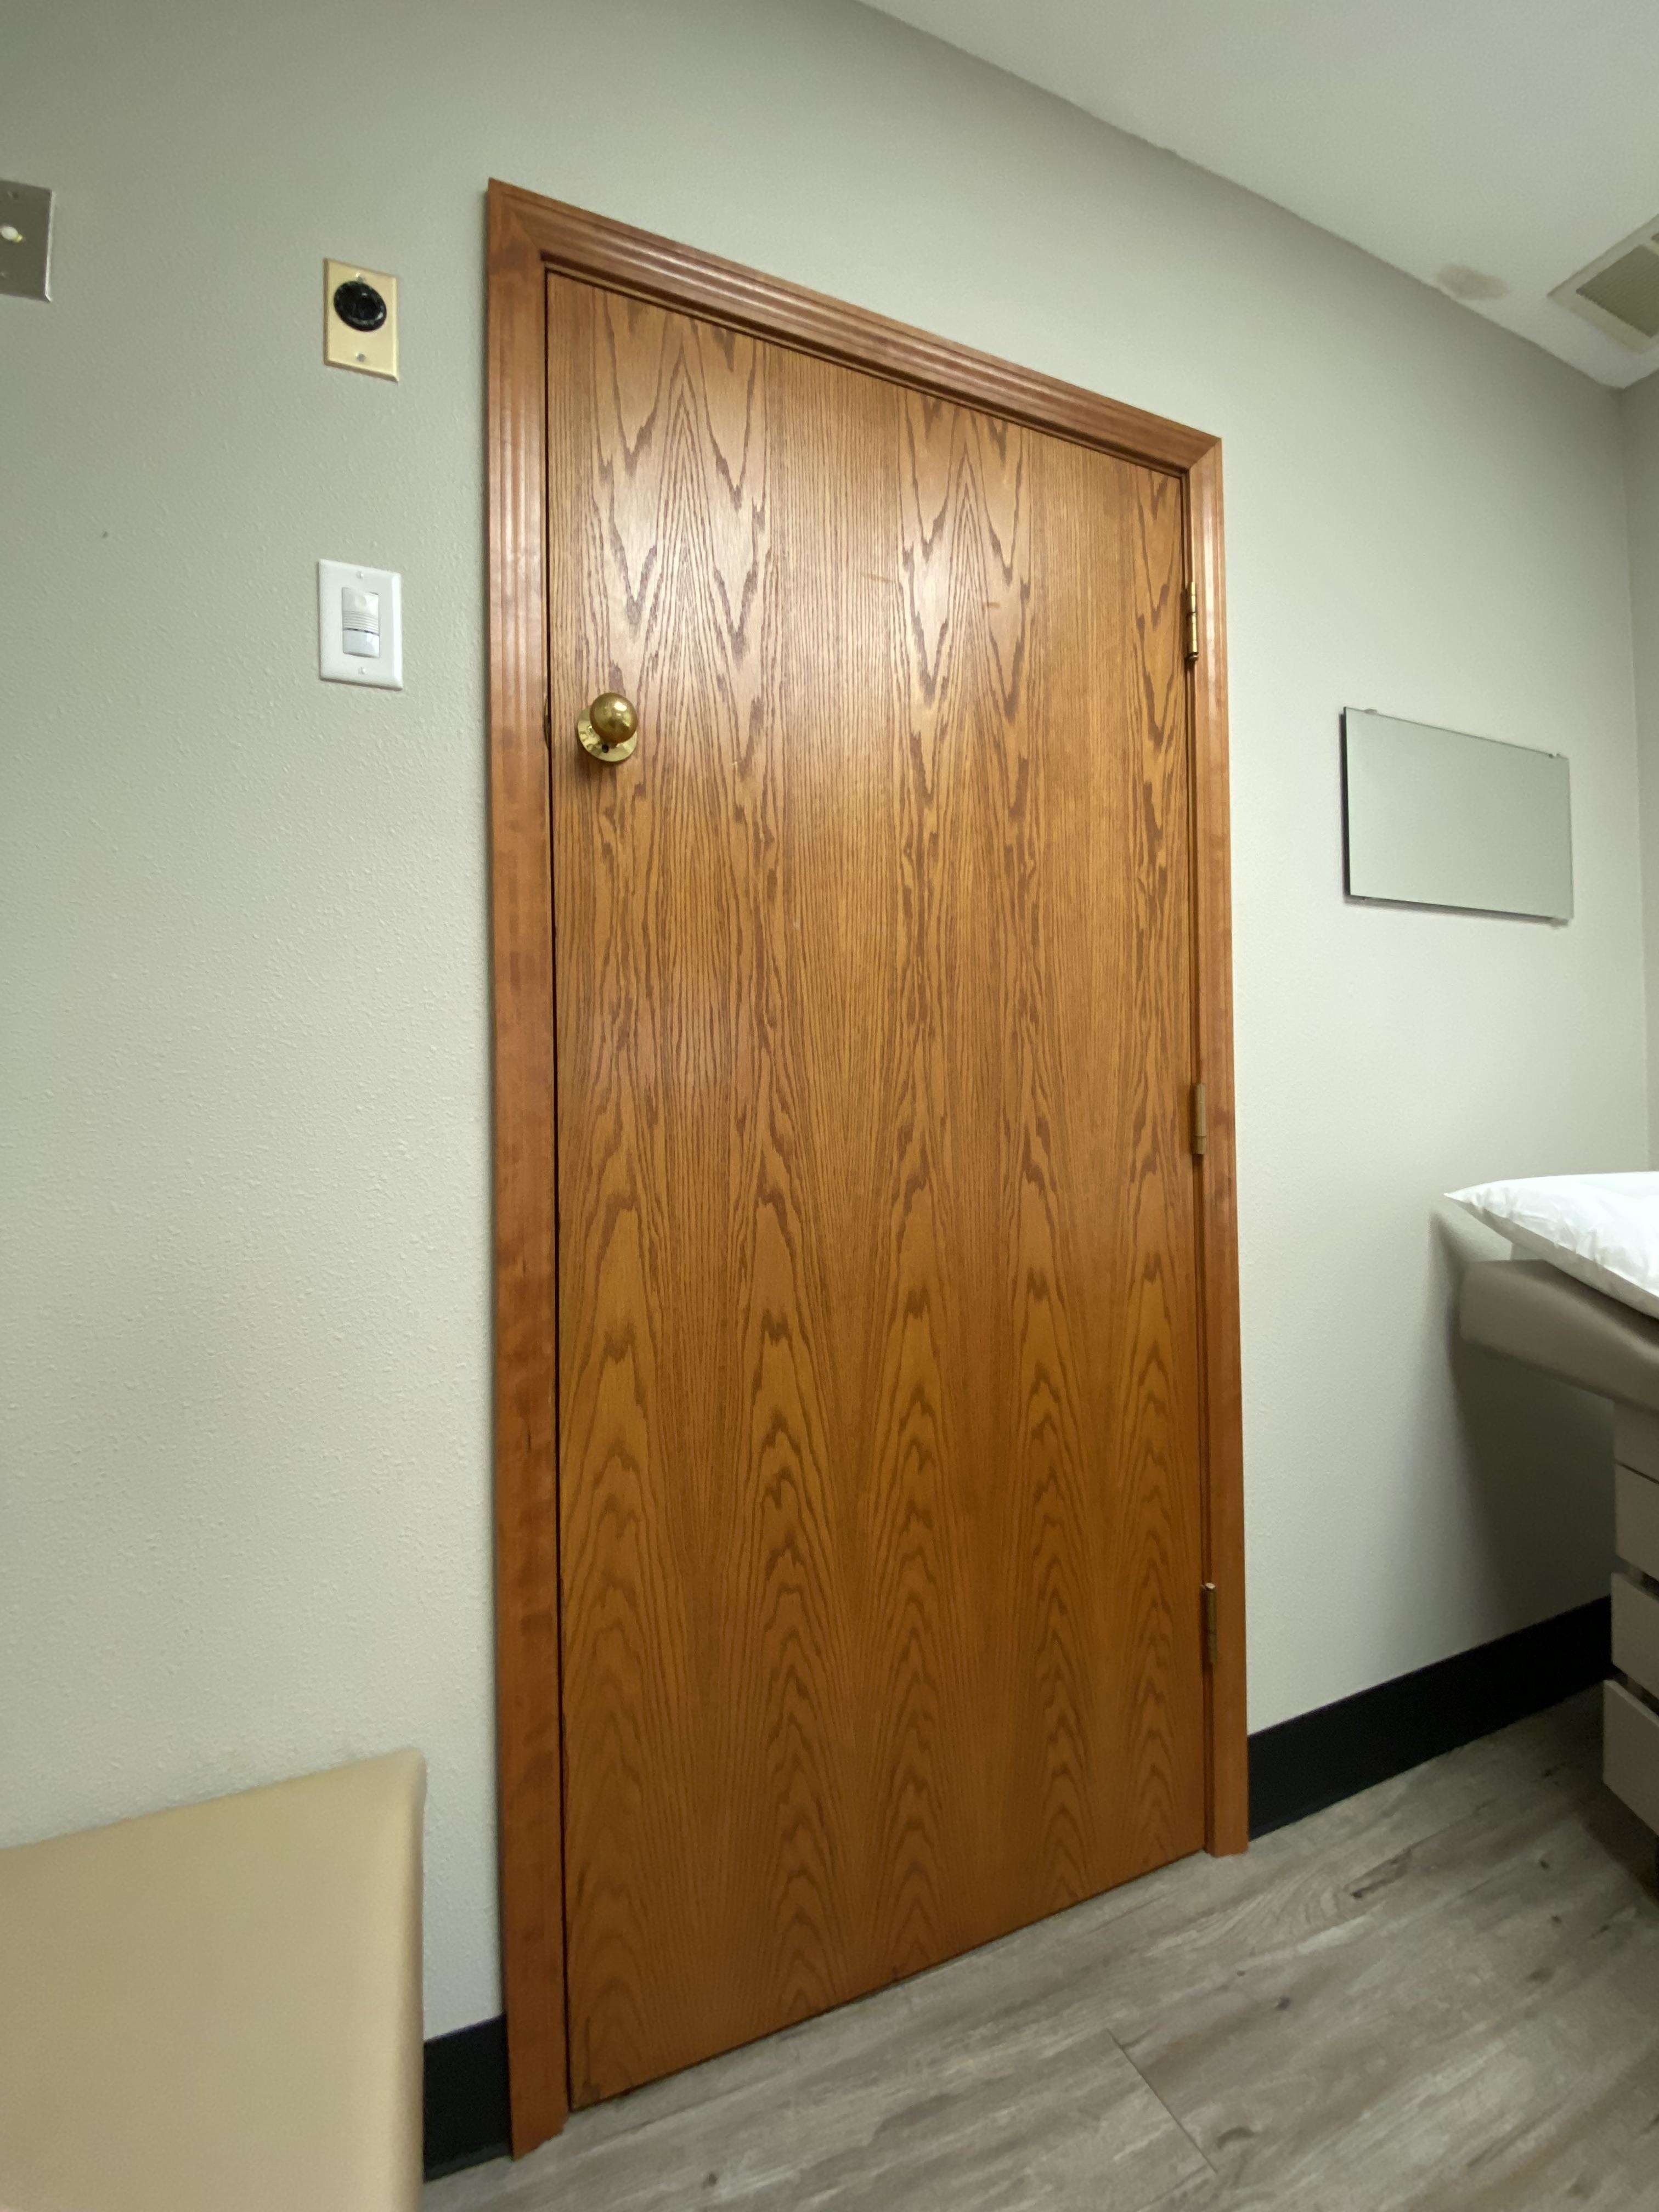 A closed wooden door in a room with a whiteboard and examination bed on the right side, with the knob more than halfway up the door